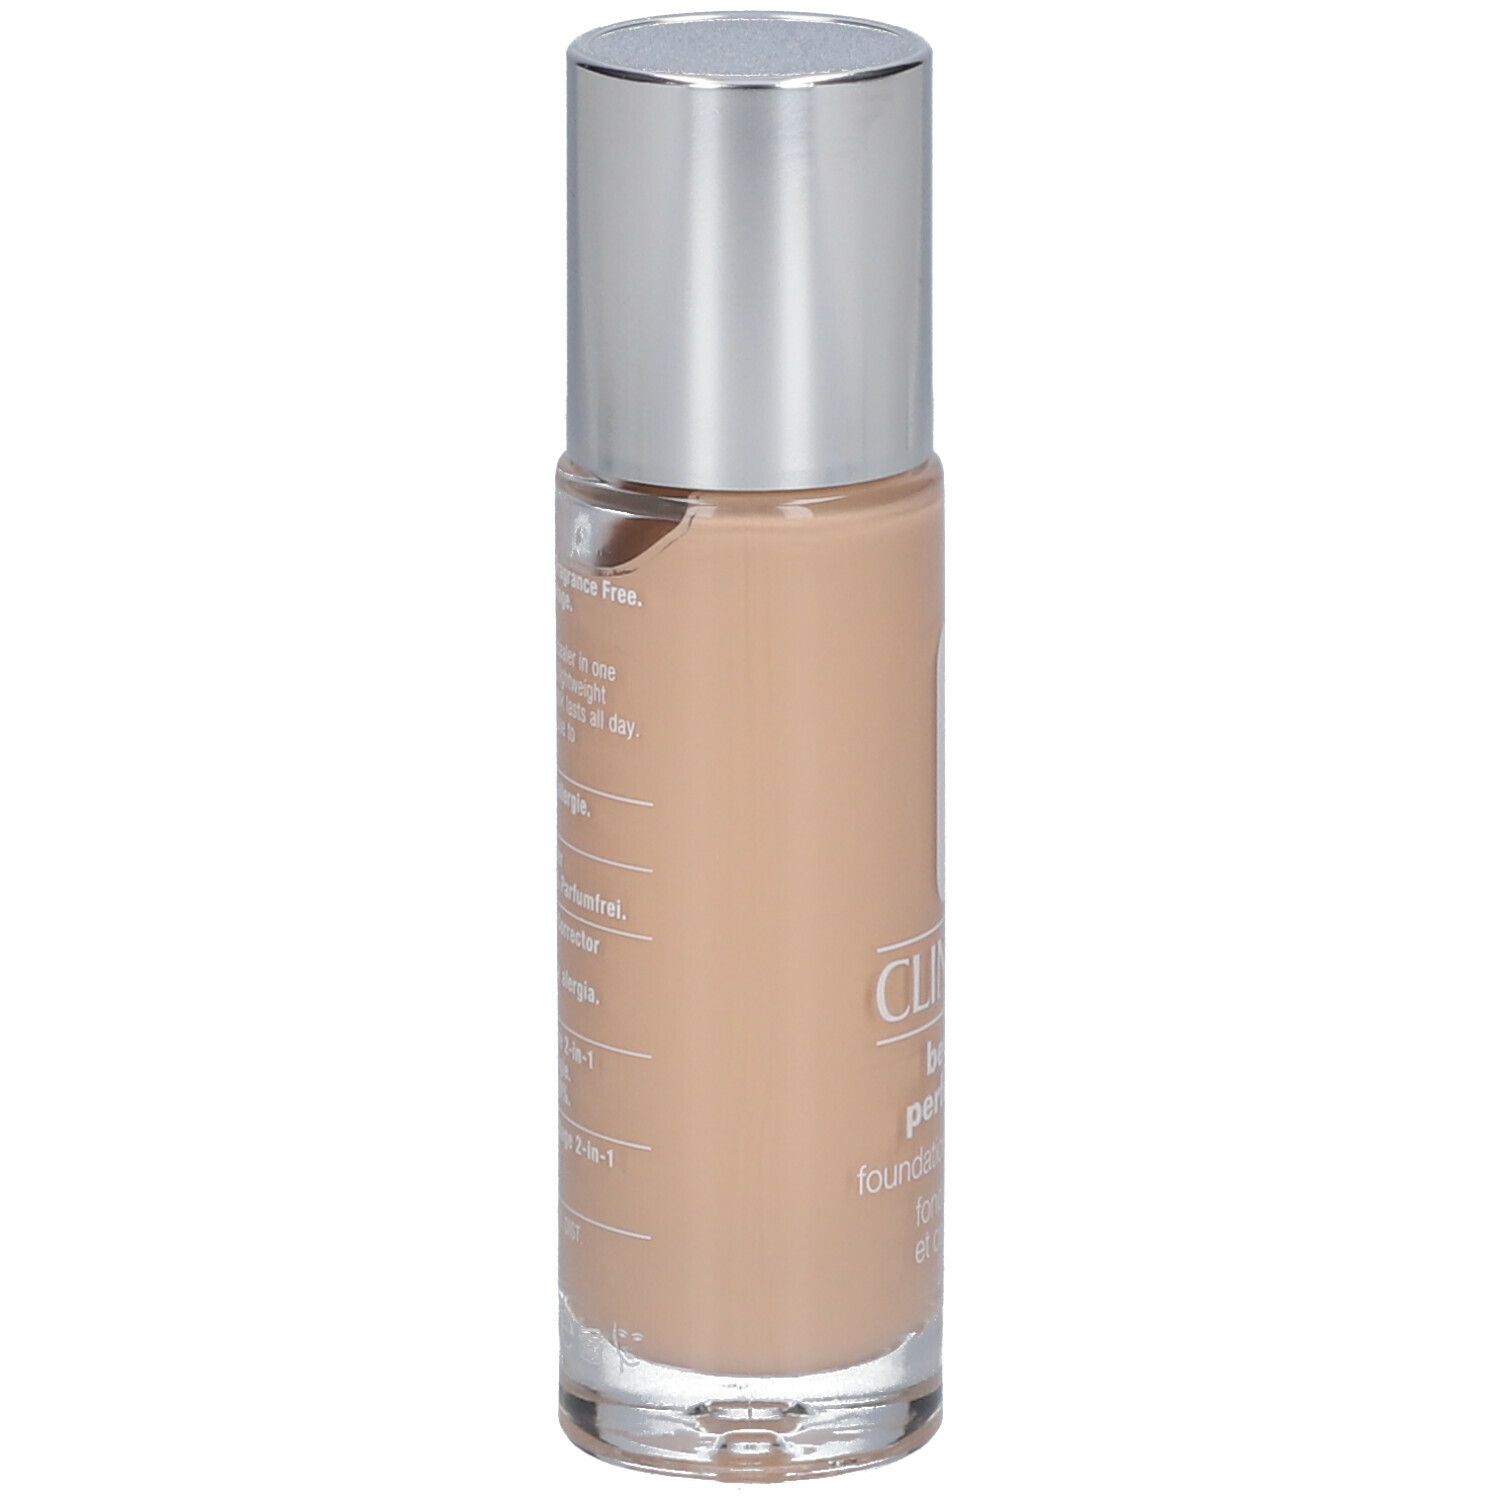 CLINIQUE Beyond Perfecting Foundation and Concealer Alabaster 02